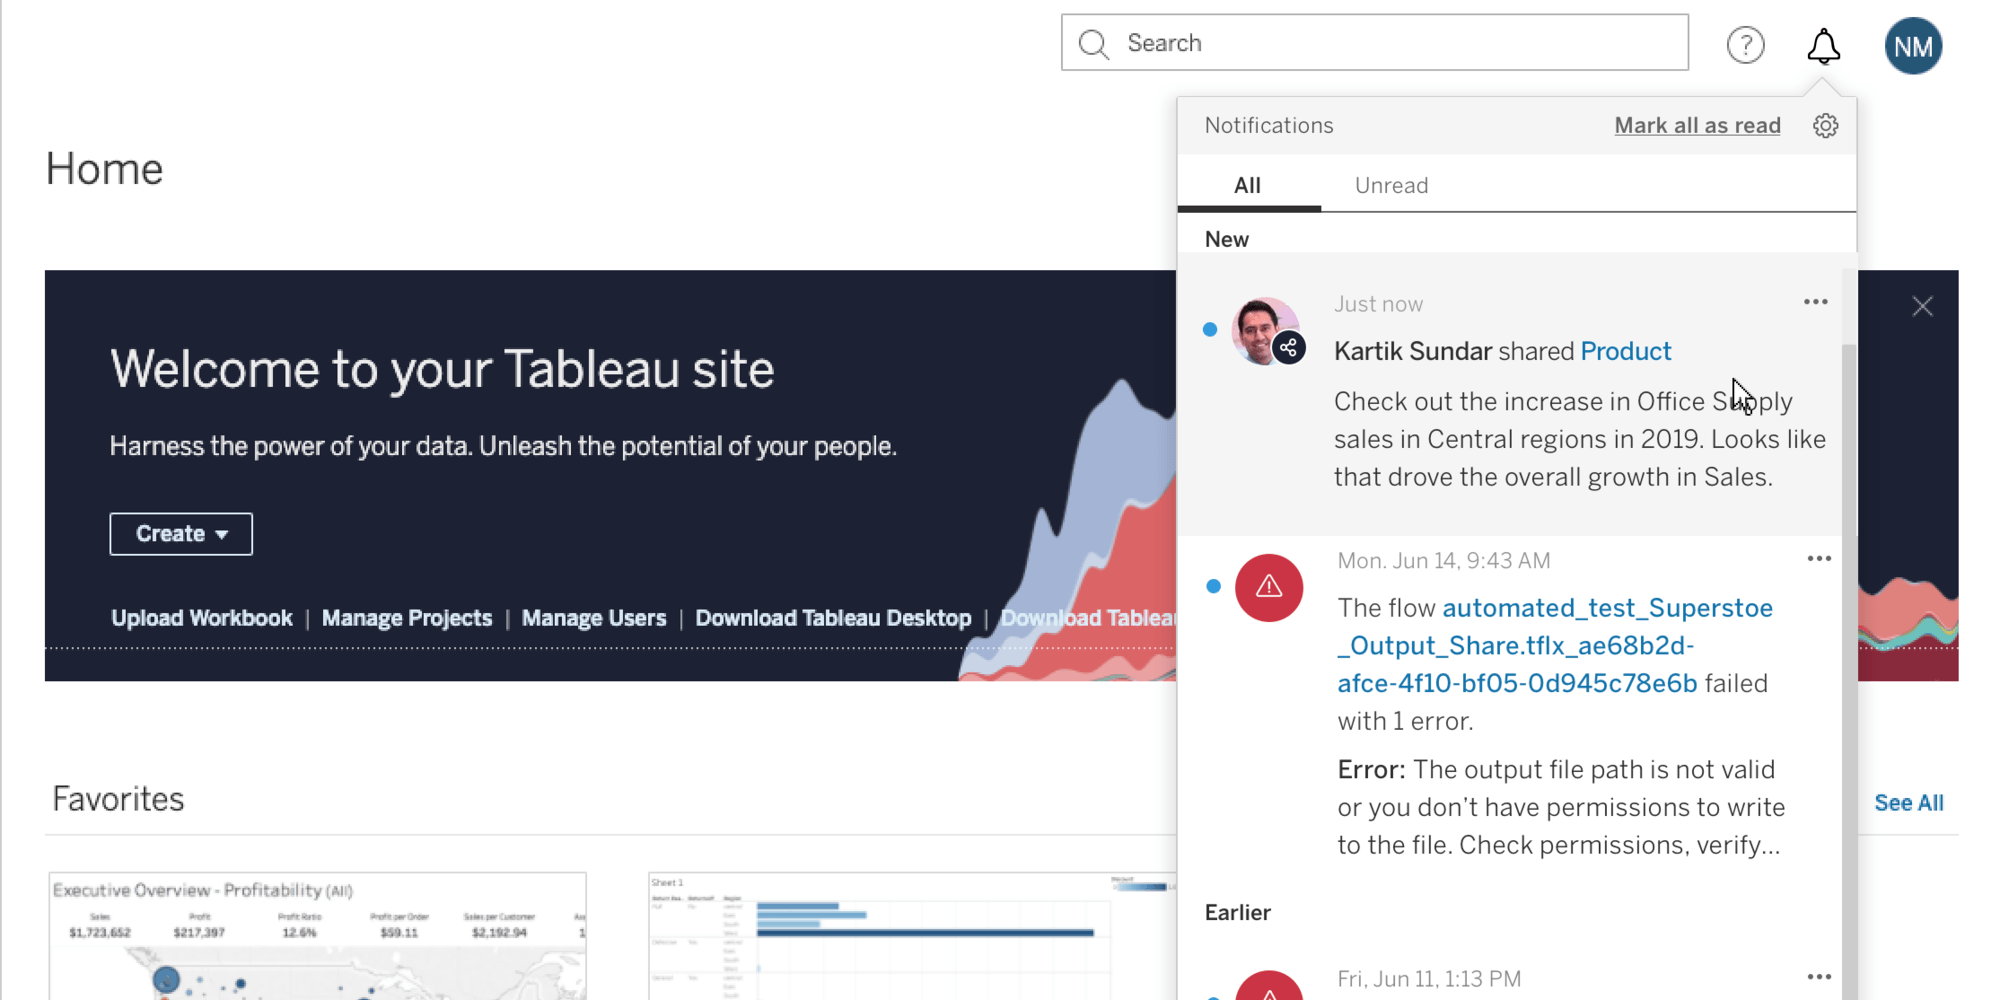 A list containing notifications is expanded from the top right corner of the Tableau Server or Online interface